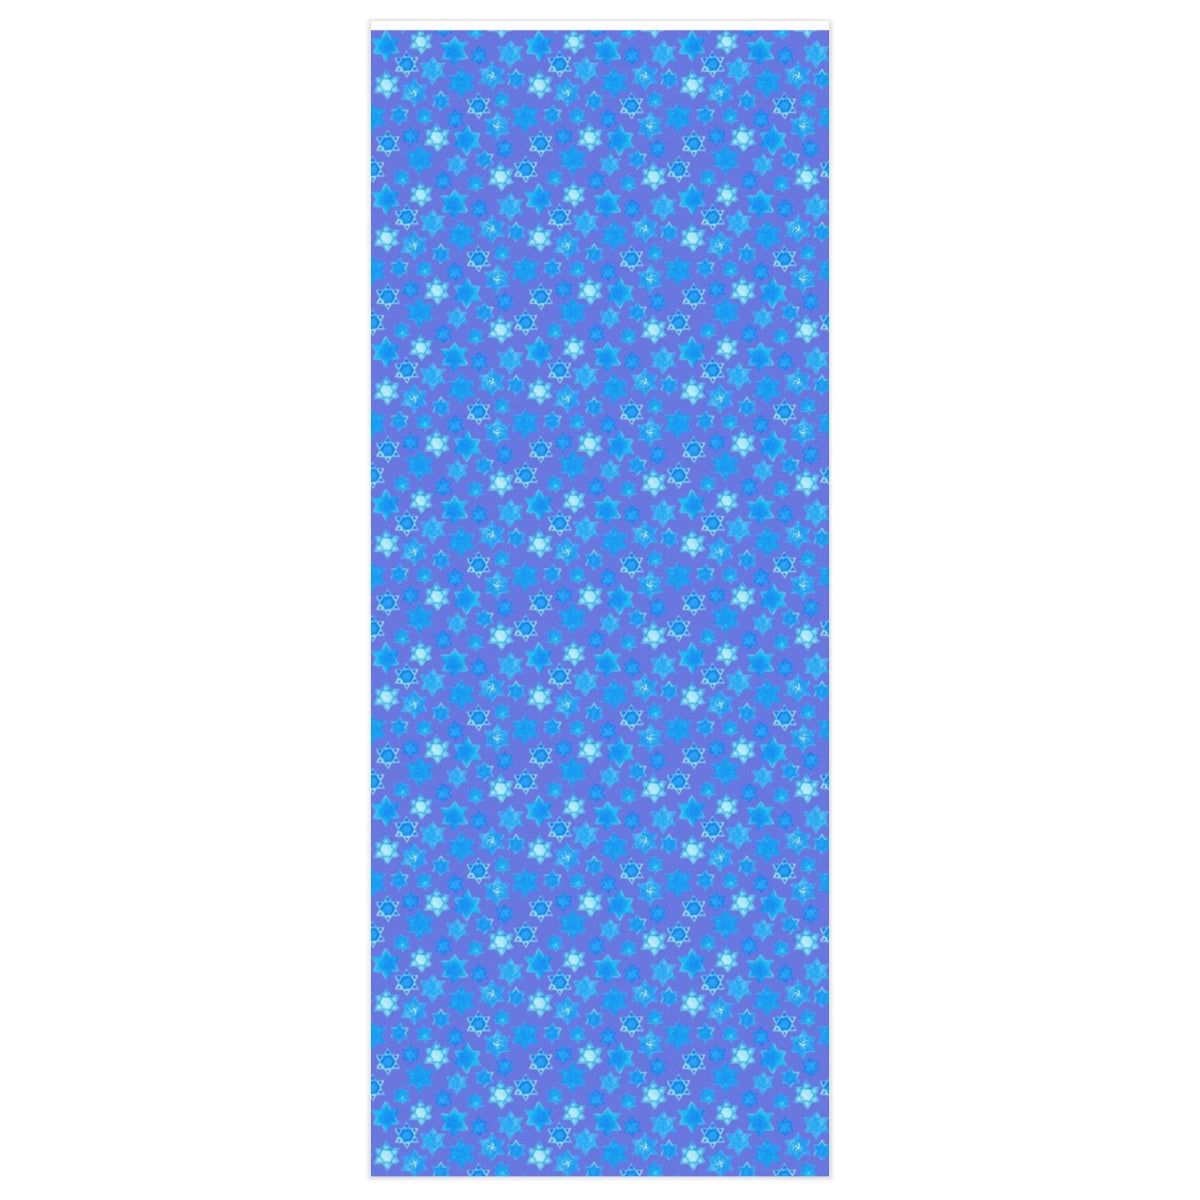 Turquoise on Blue Stars of David Wrapping Paper